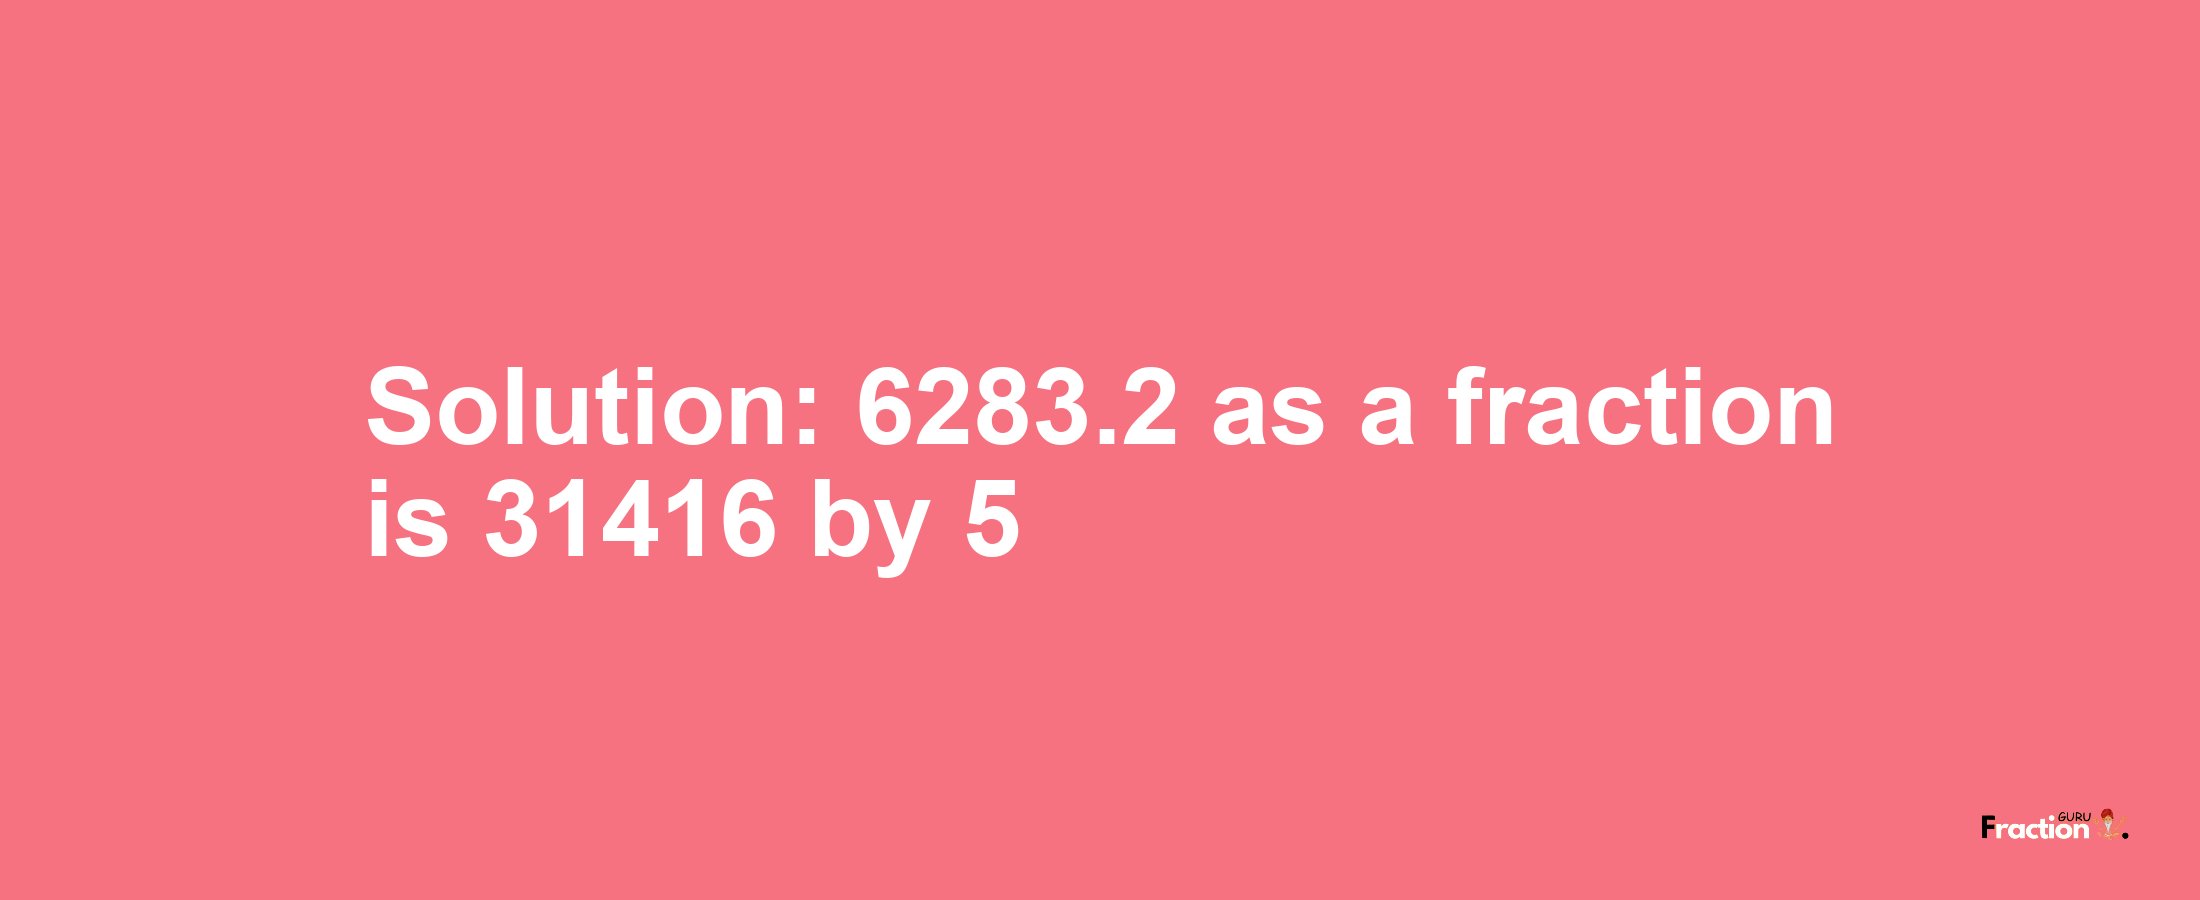 Solution:6283.2 as a fraction is 31416/5